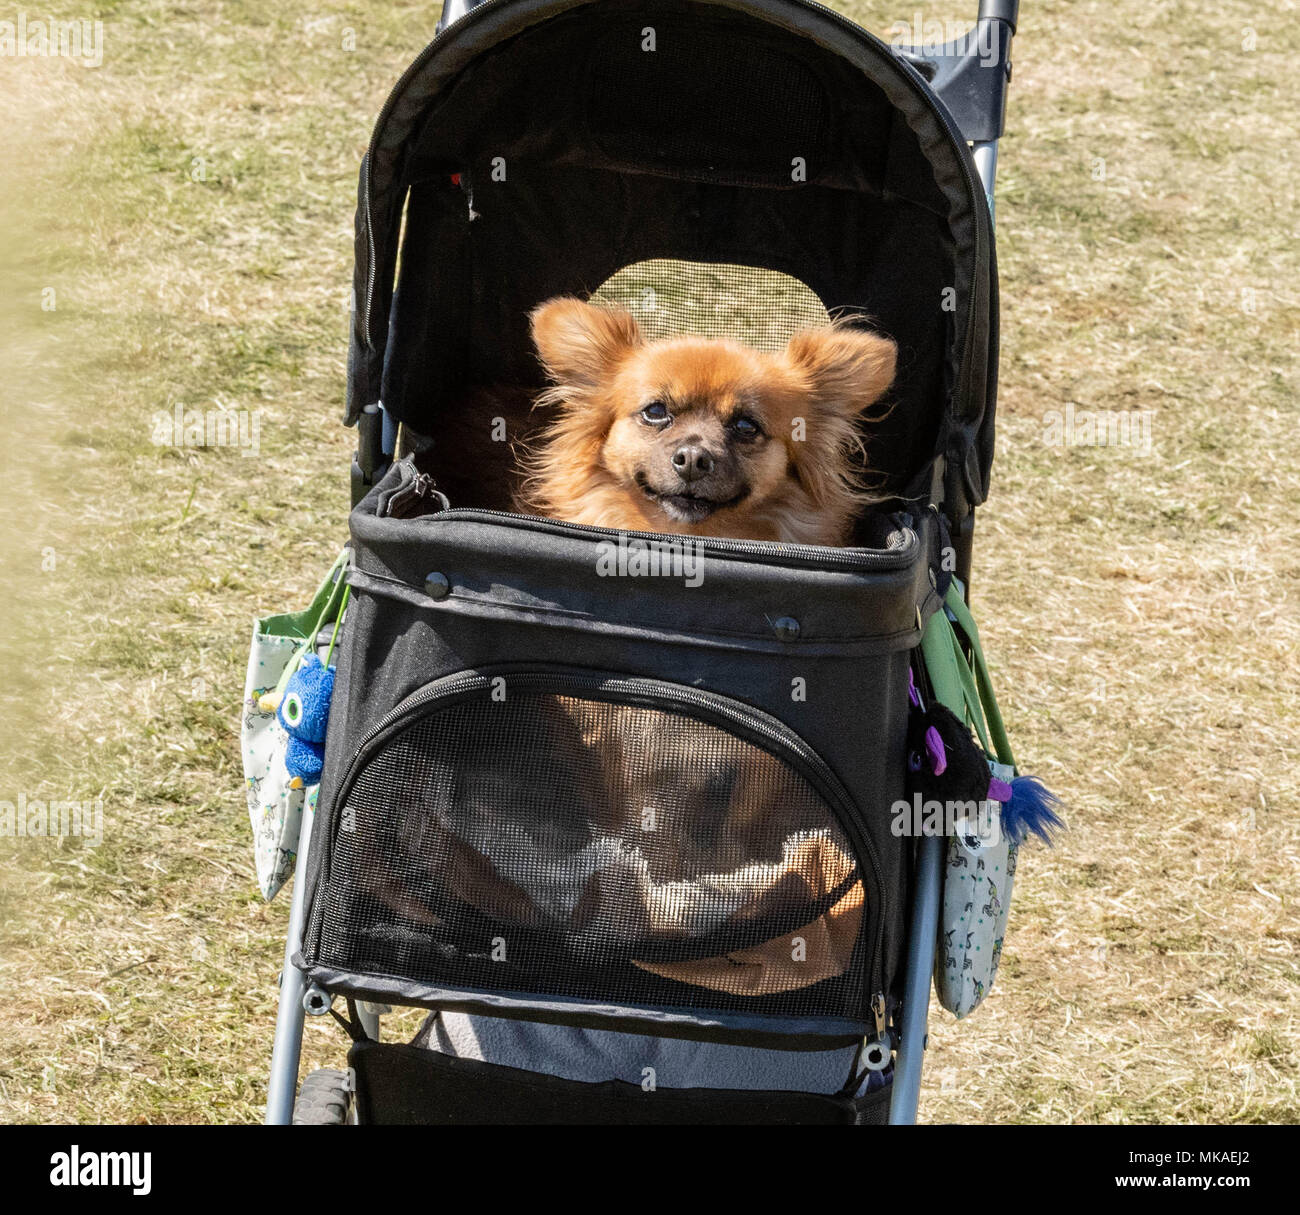 Brentwood, Essex, 7th May 2018, A dog in a buggy at the All about Dogs show, Brentwood Essex, Credit Ian Davidson/Alamy Live News Stock Photo